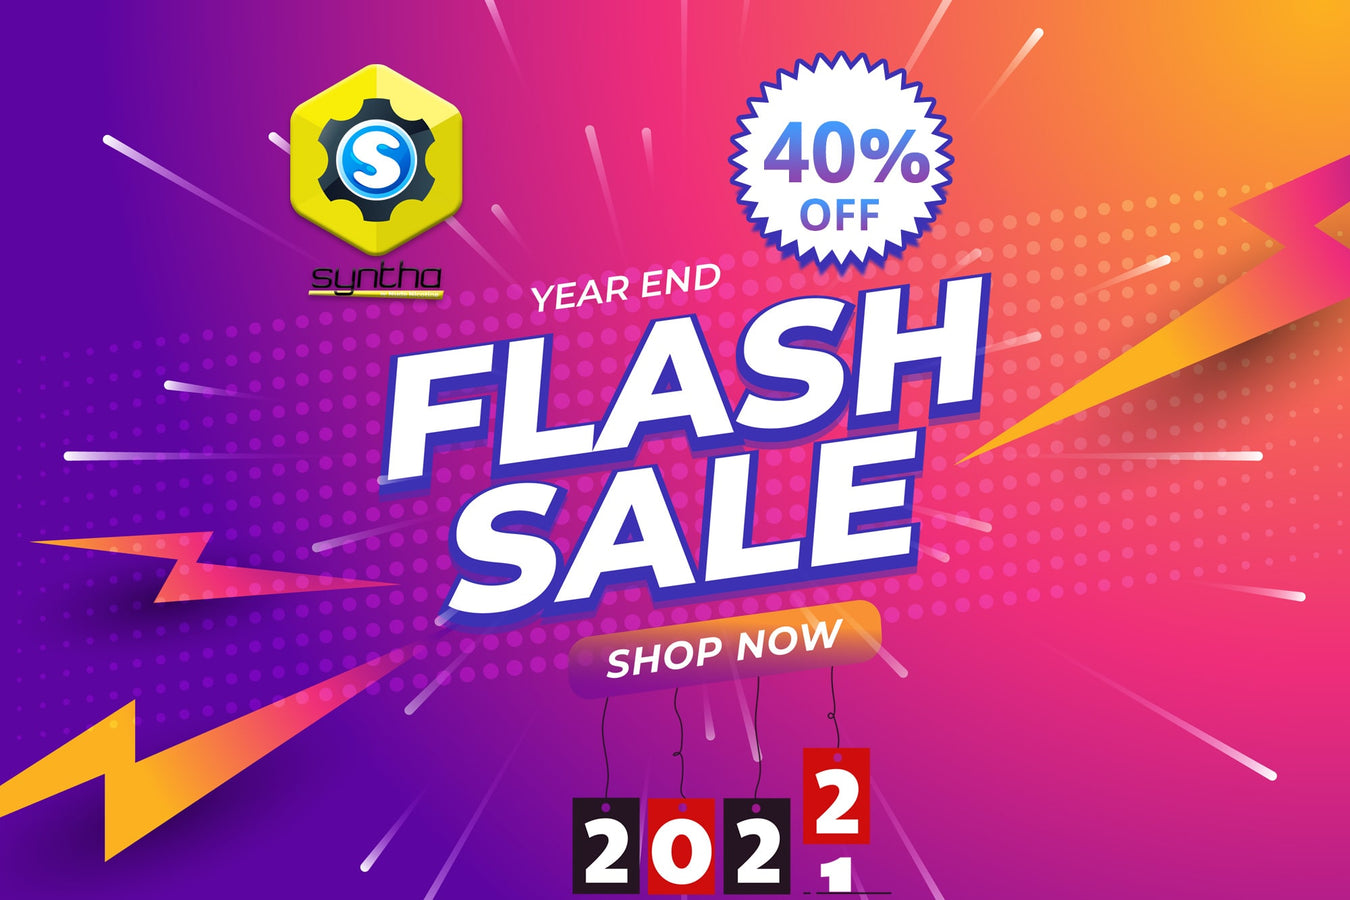 Year End Sale